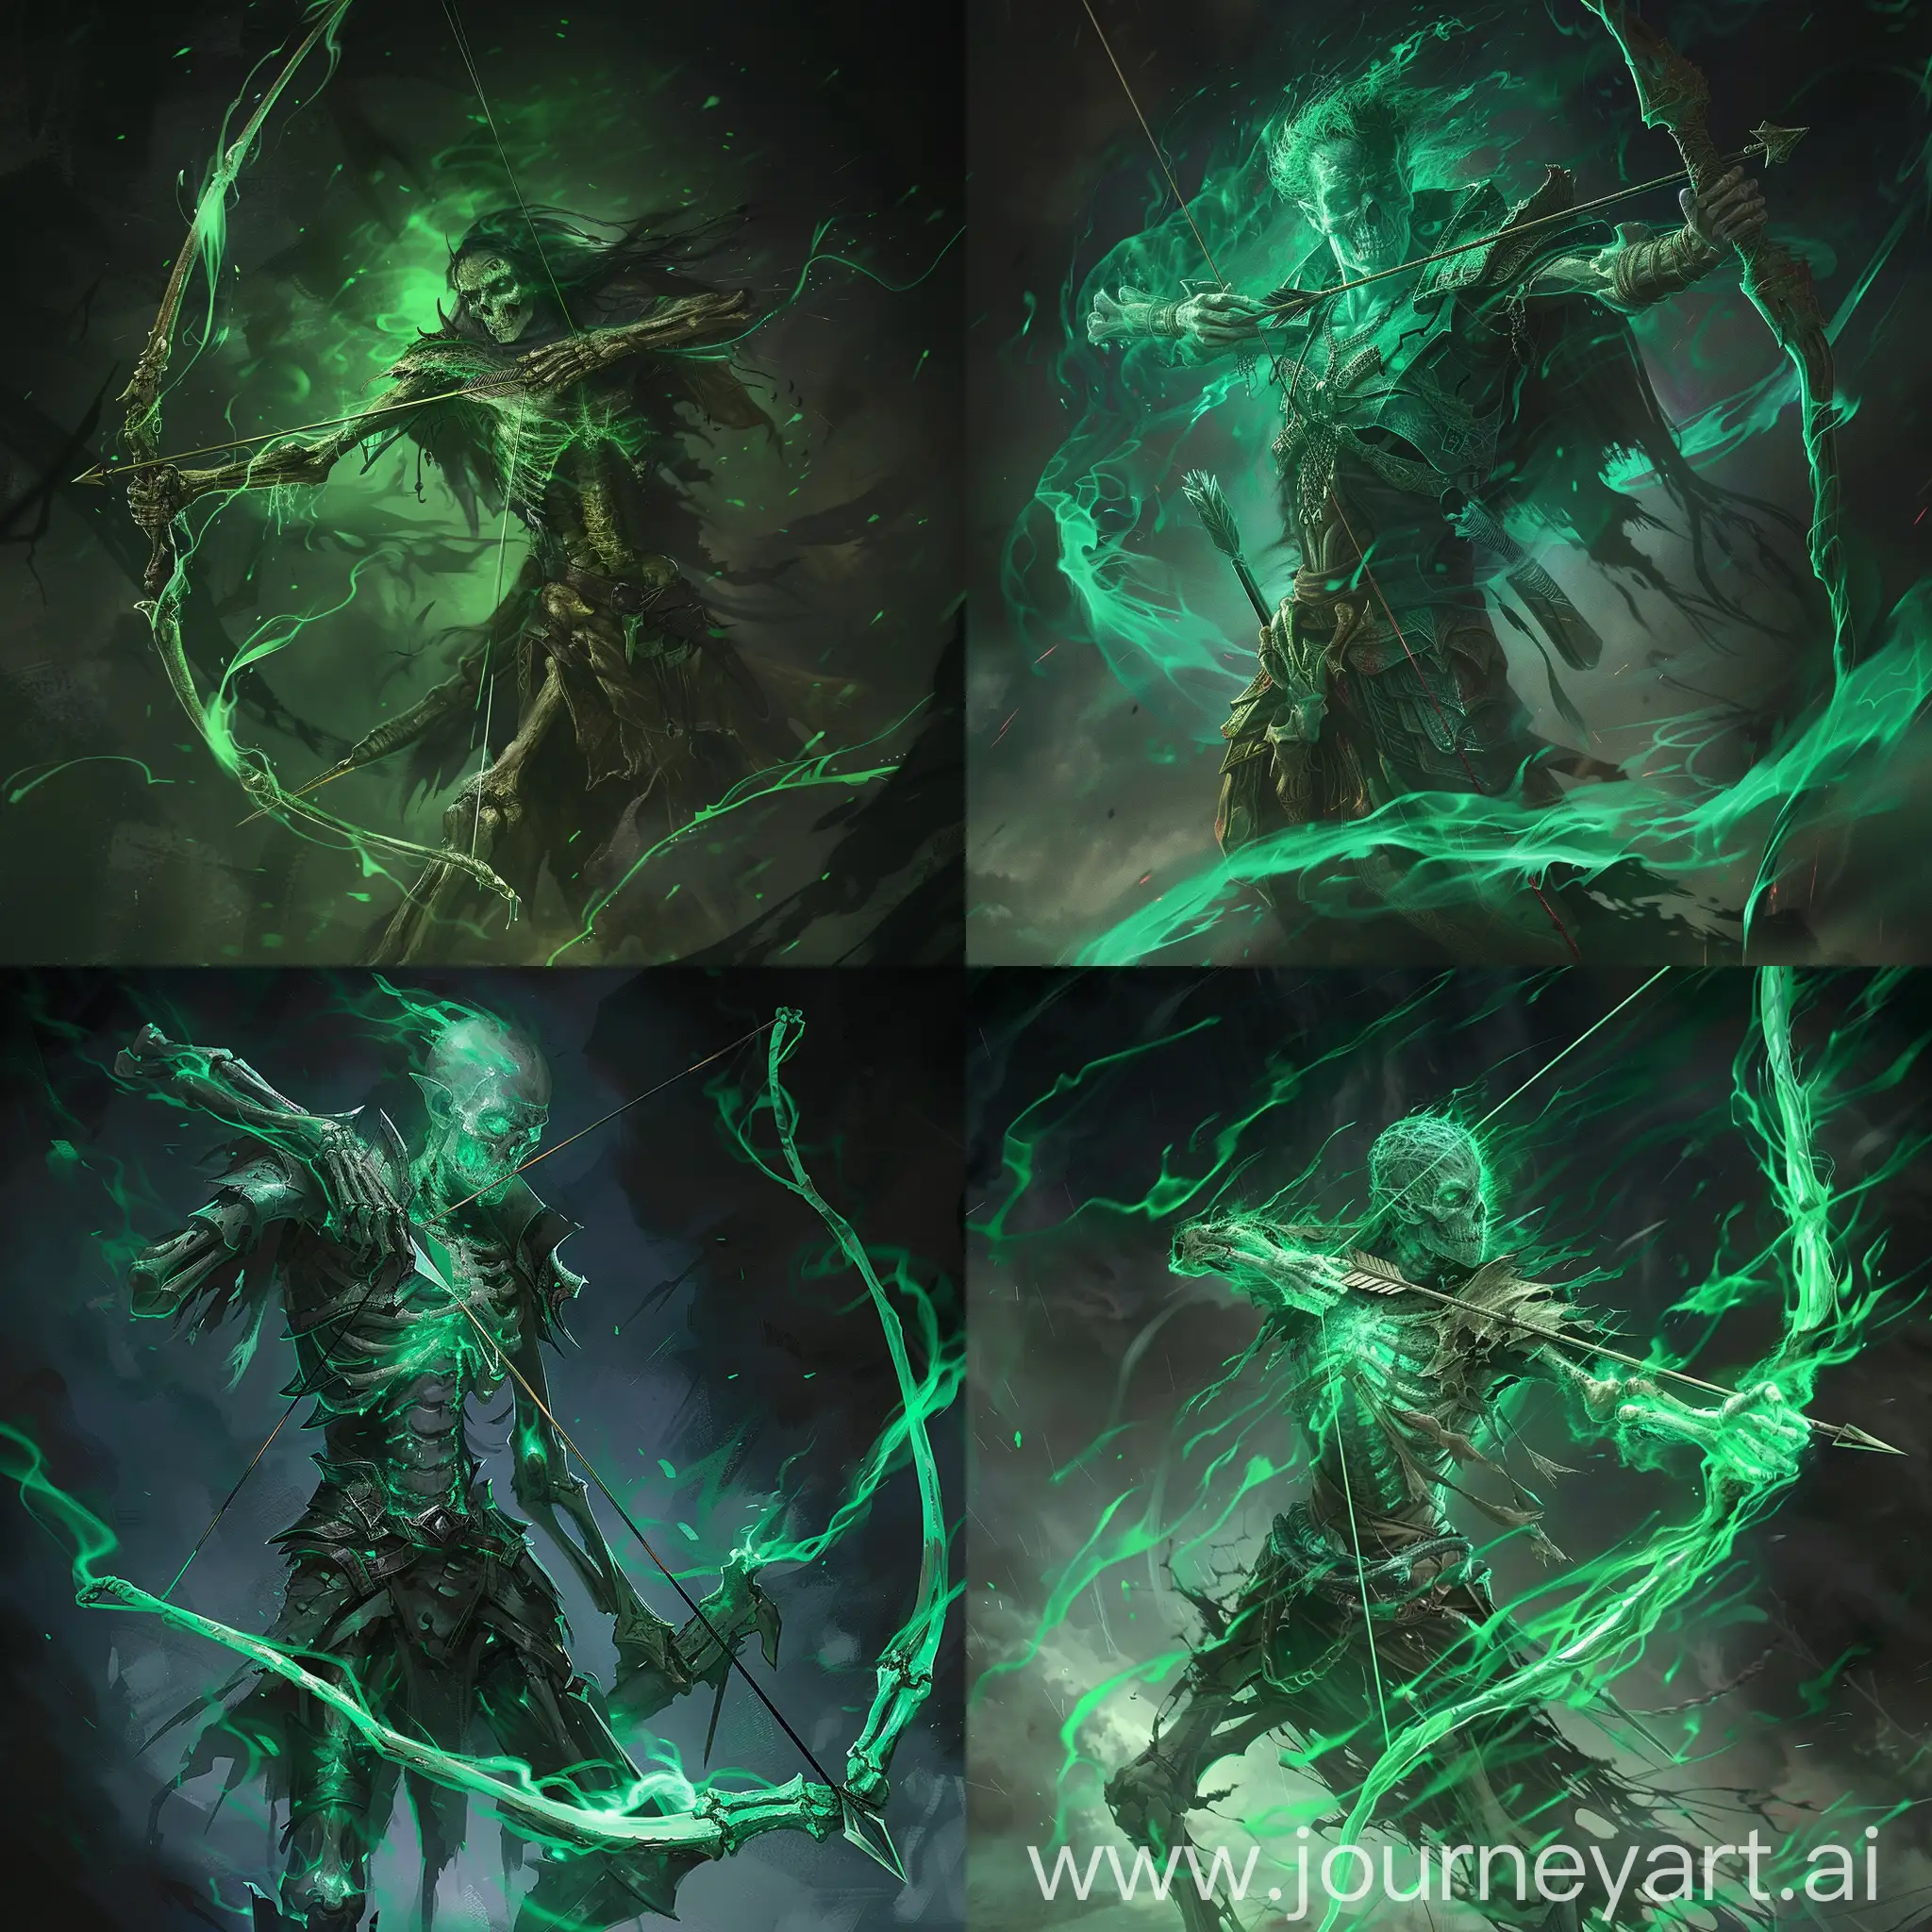 dnd dark fantasy theme,green spectral undead human carrying a bow he looks like undead with green energy around him.He is wearing a armor that is made of bones.Background is dark midnight.Staring holding his bow.